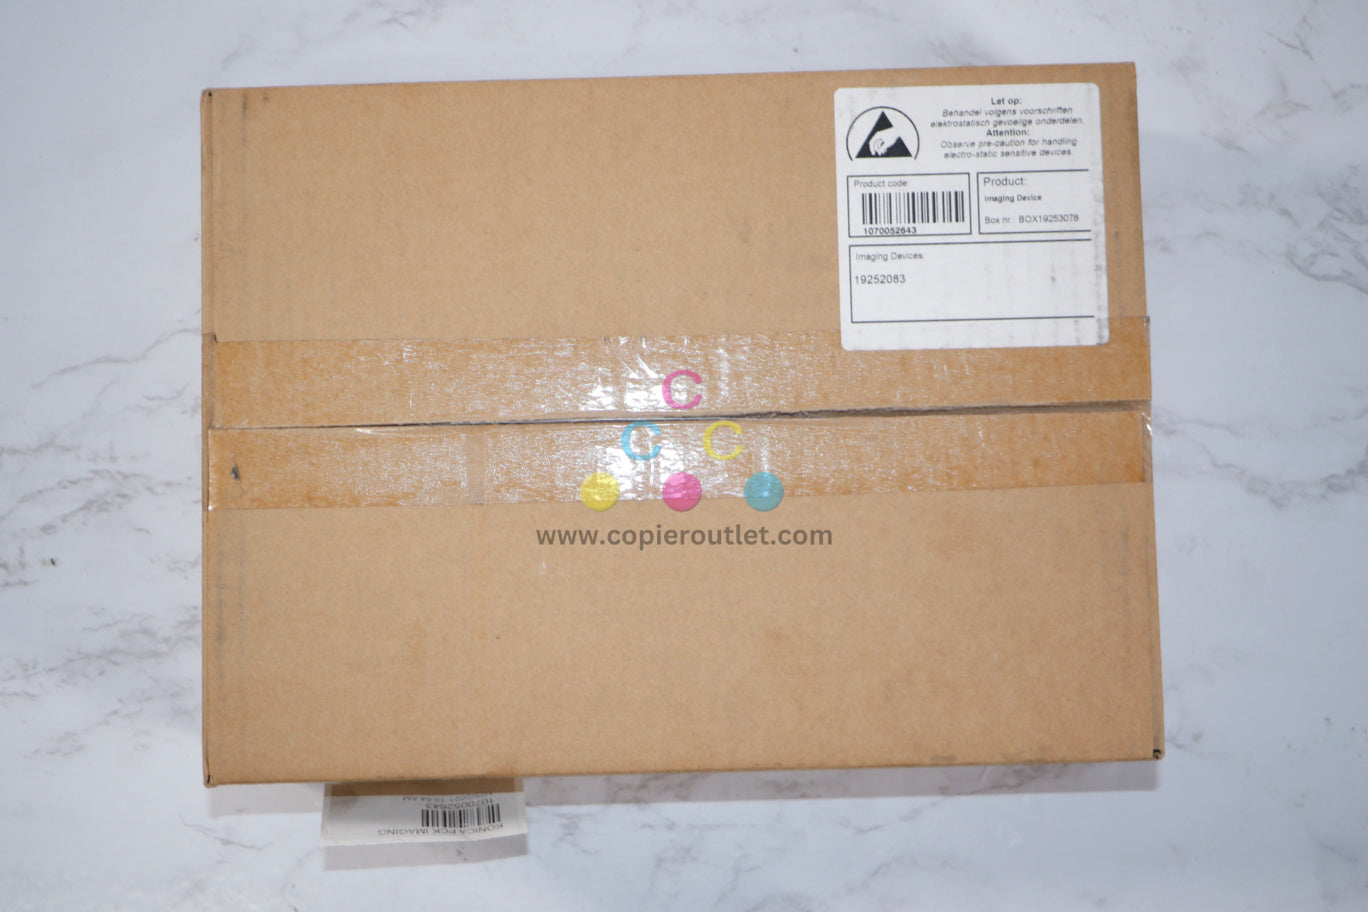 New Oce/Canon CW650,500,700,3500 Print Head / Imaging Device(Part No. 1070052643)